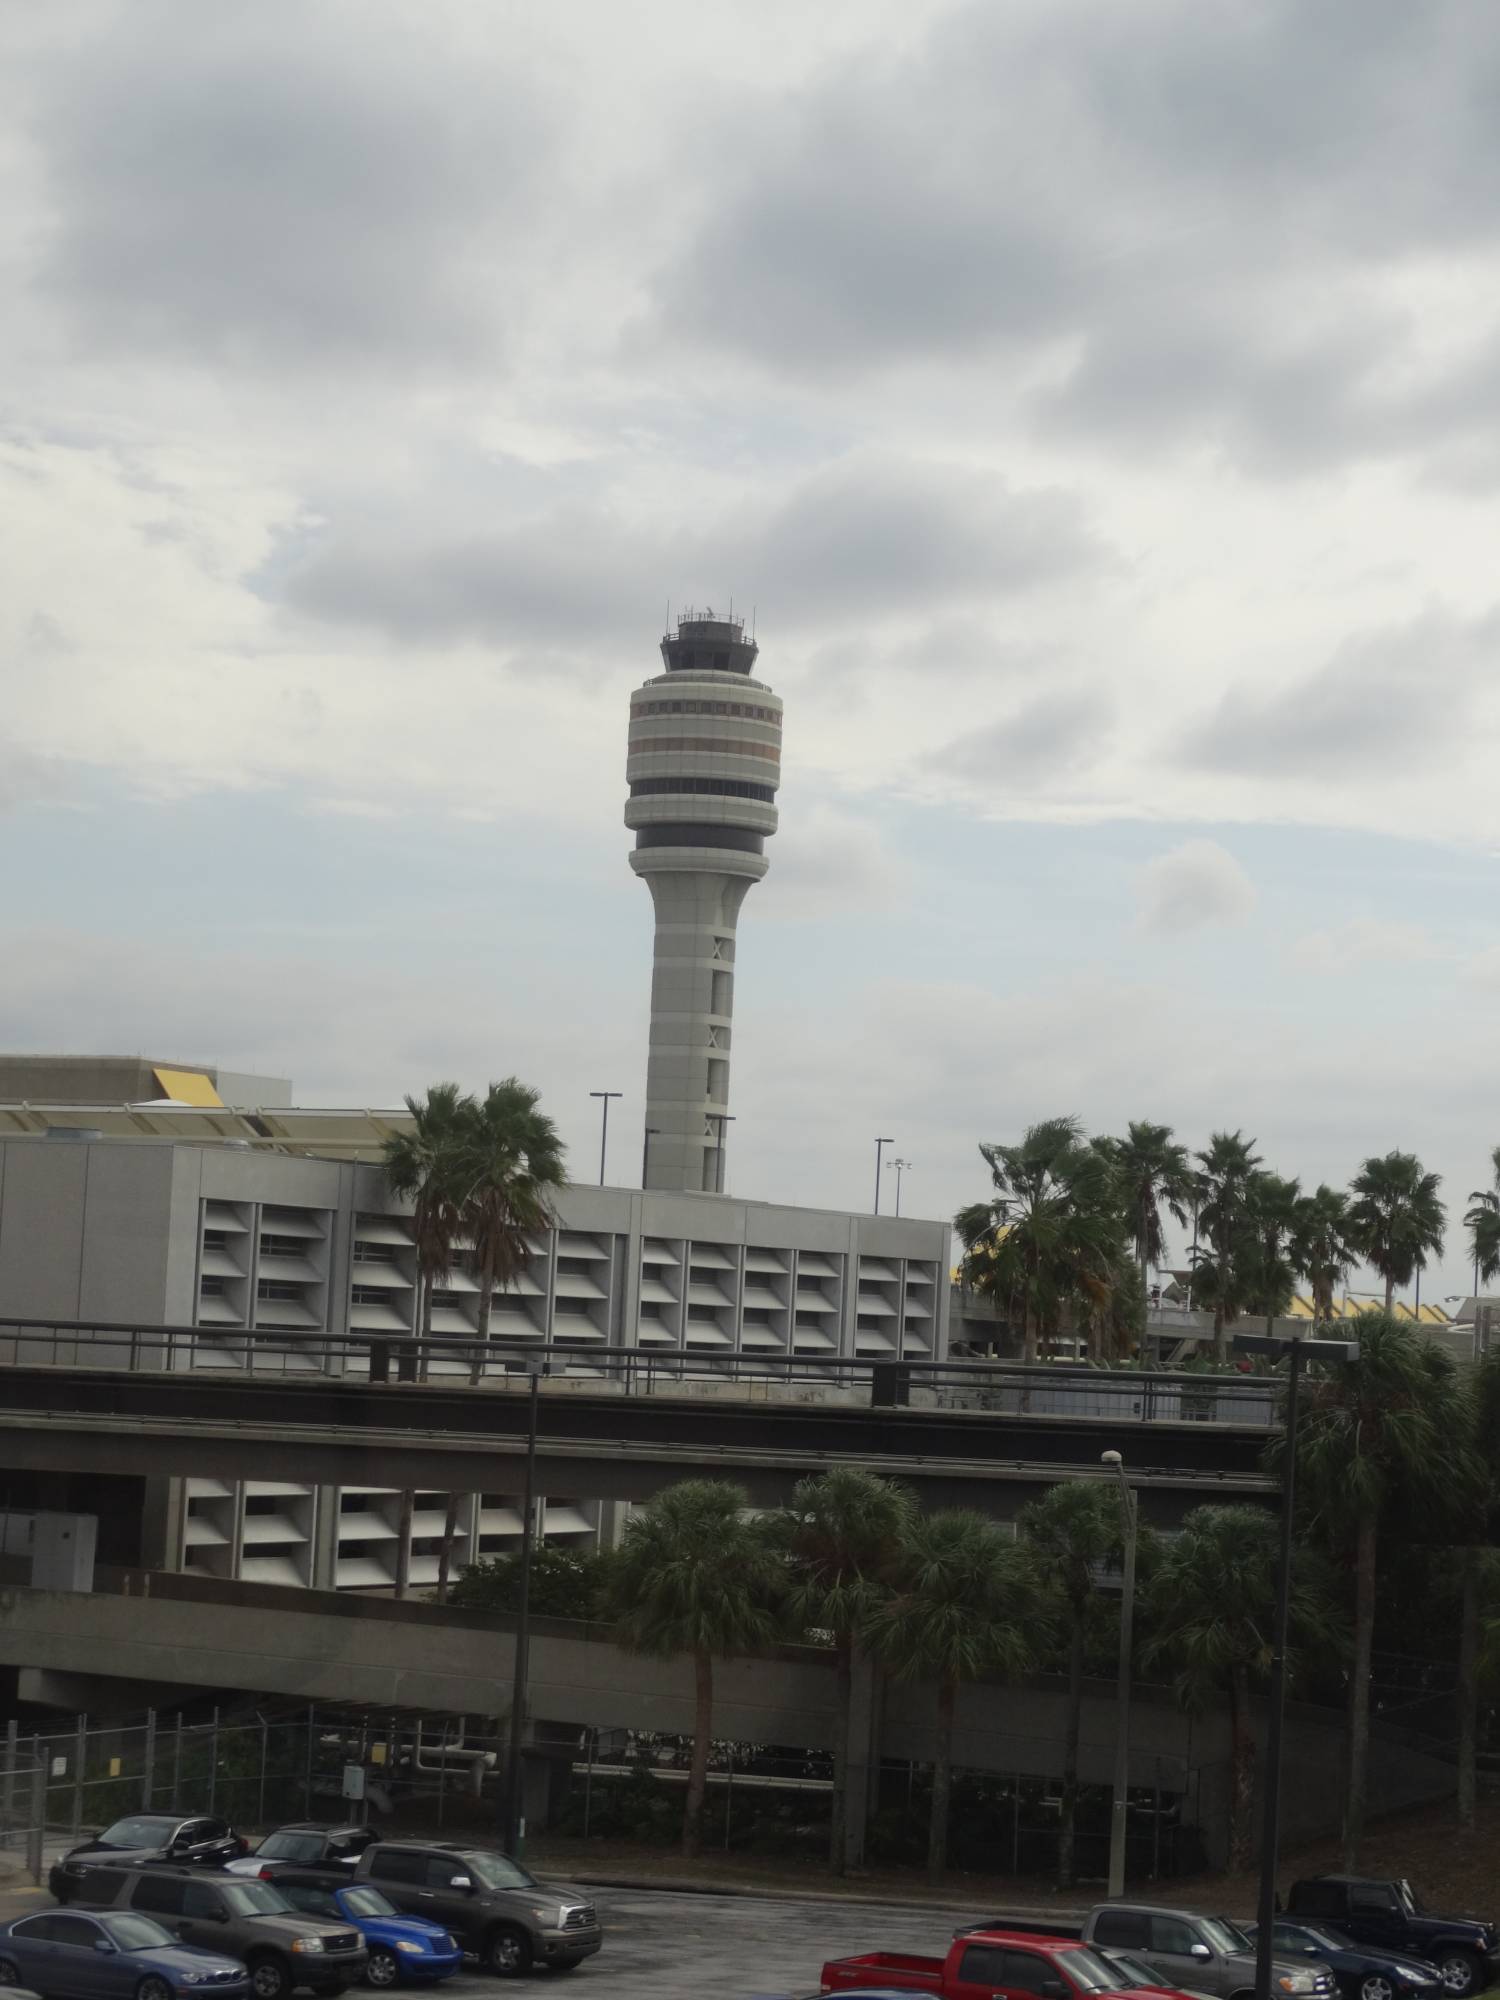 Orlando International Airport - view from monorail